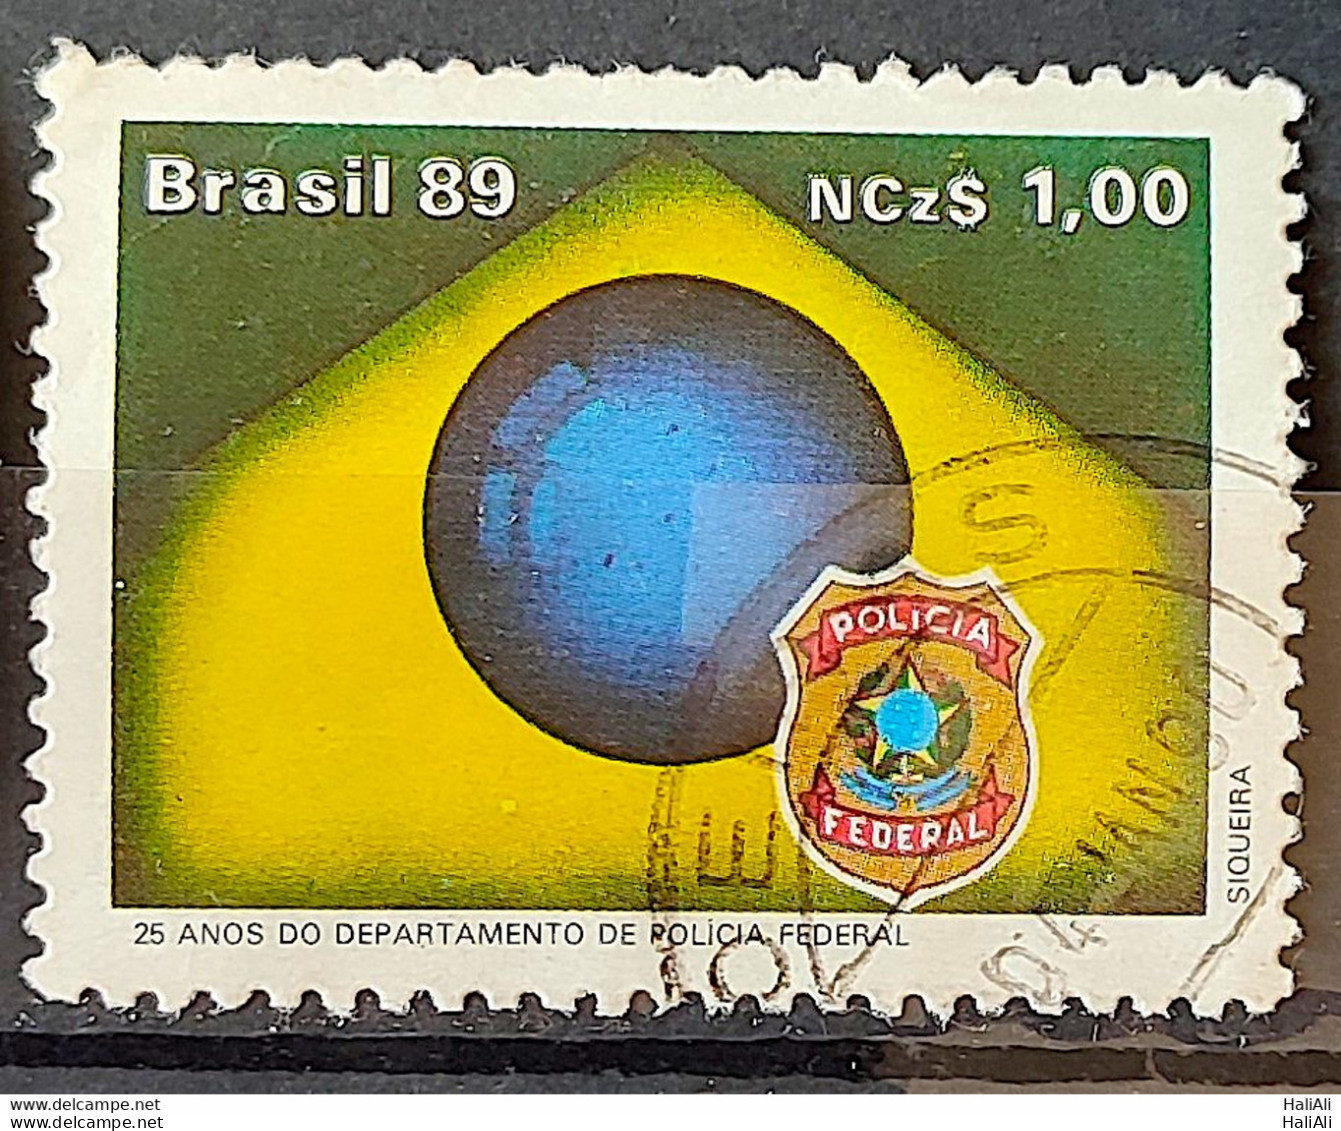 C 1656 Brazil Stamp 25 Years Federal Police Department Flag Military 1989 Circulated 2 - Used Stamps